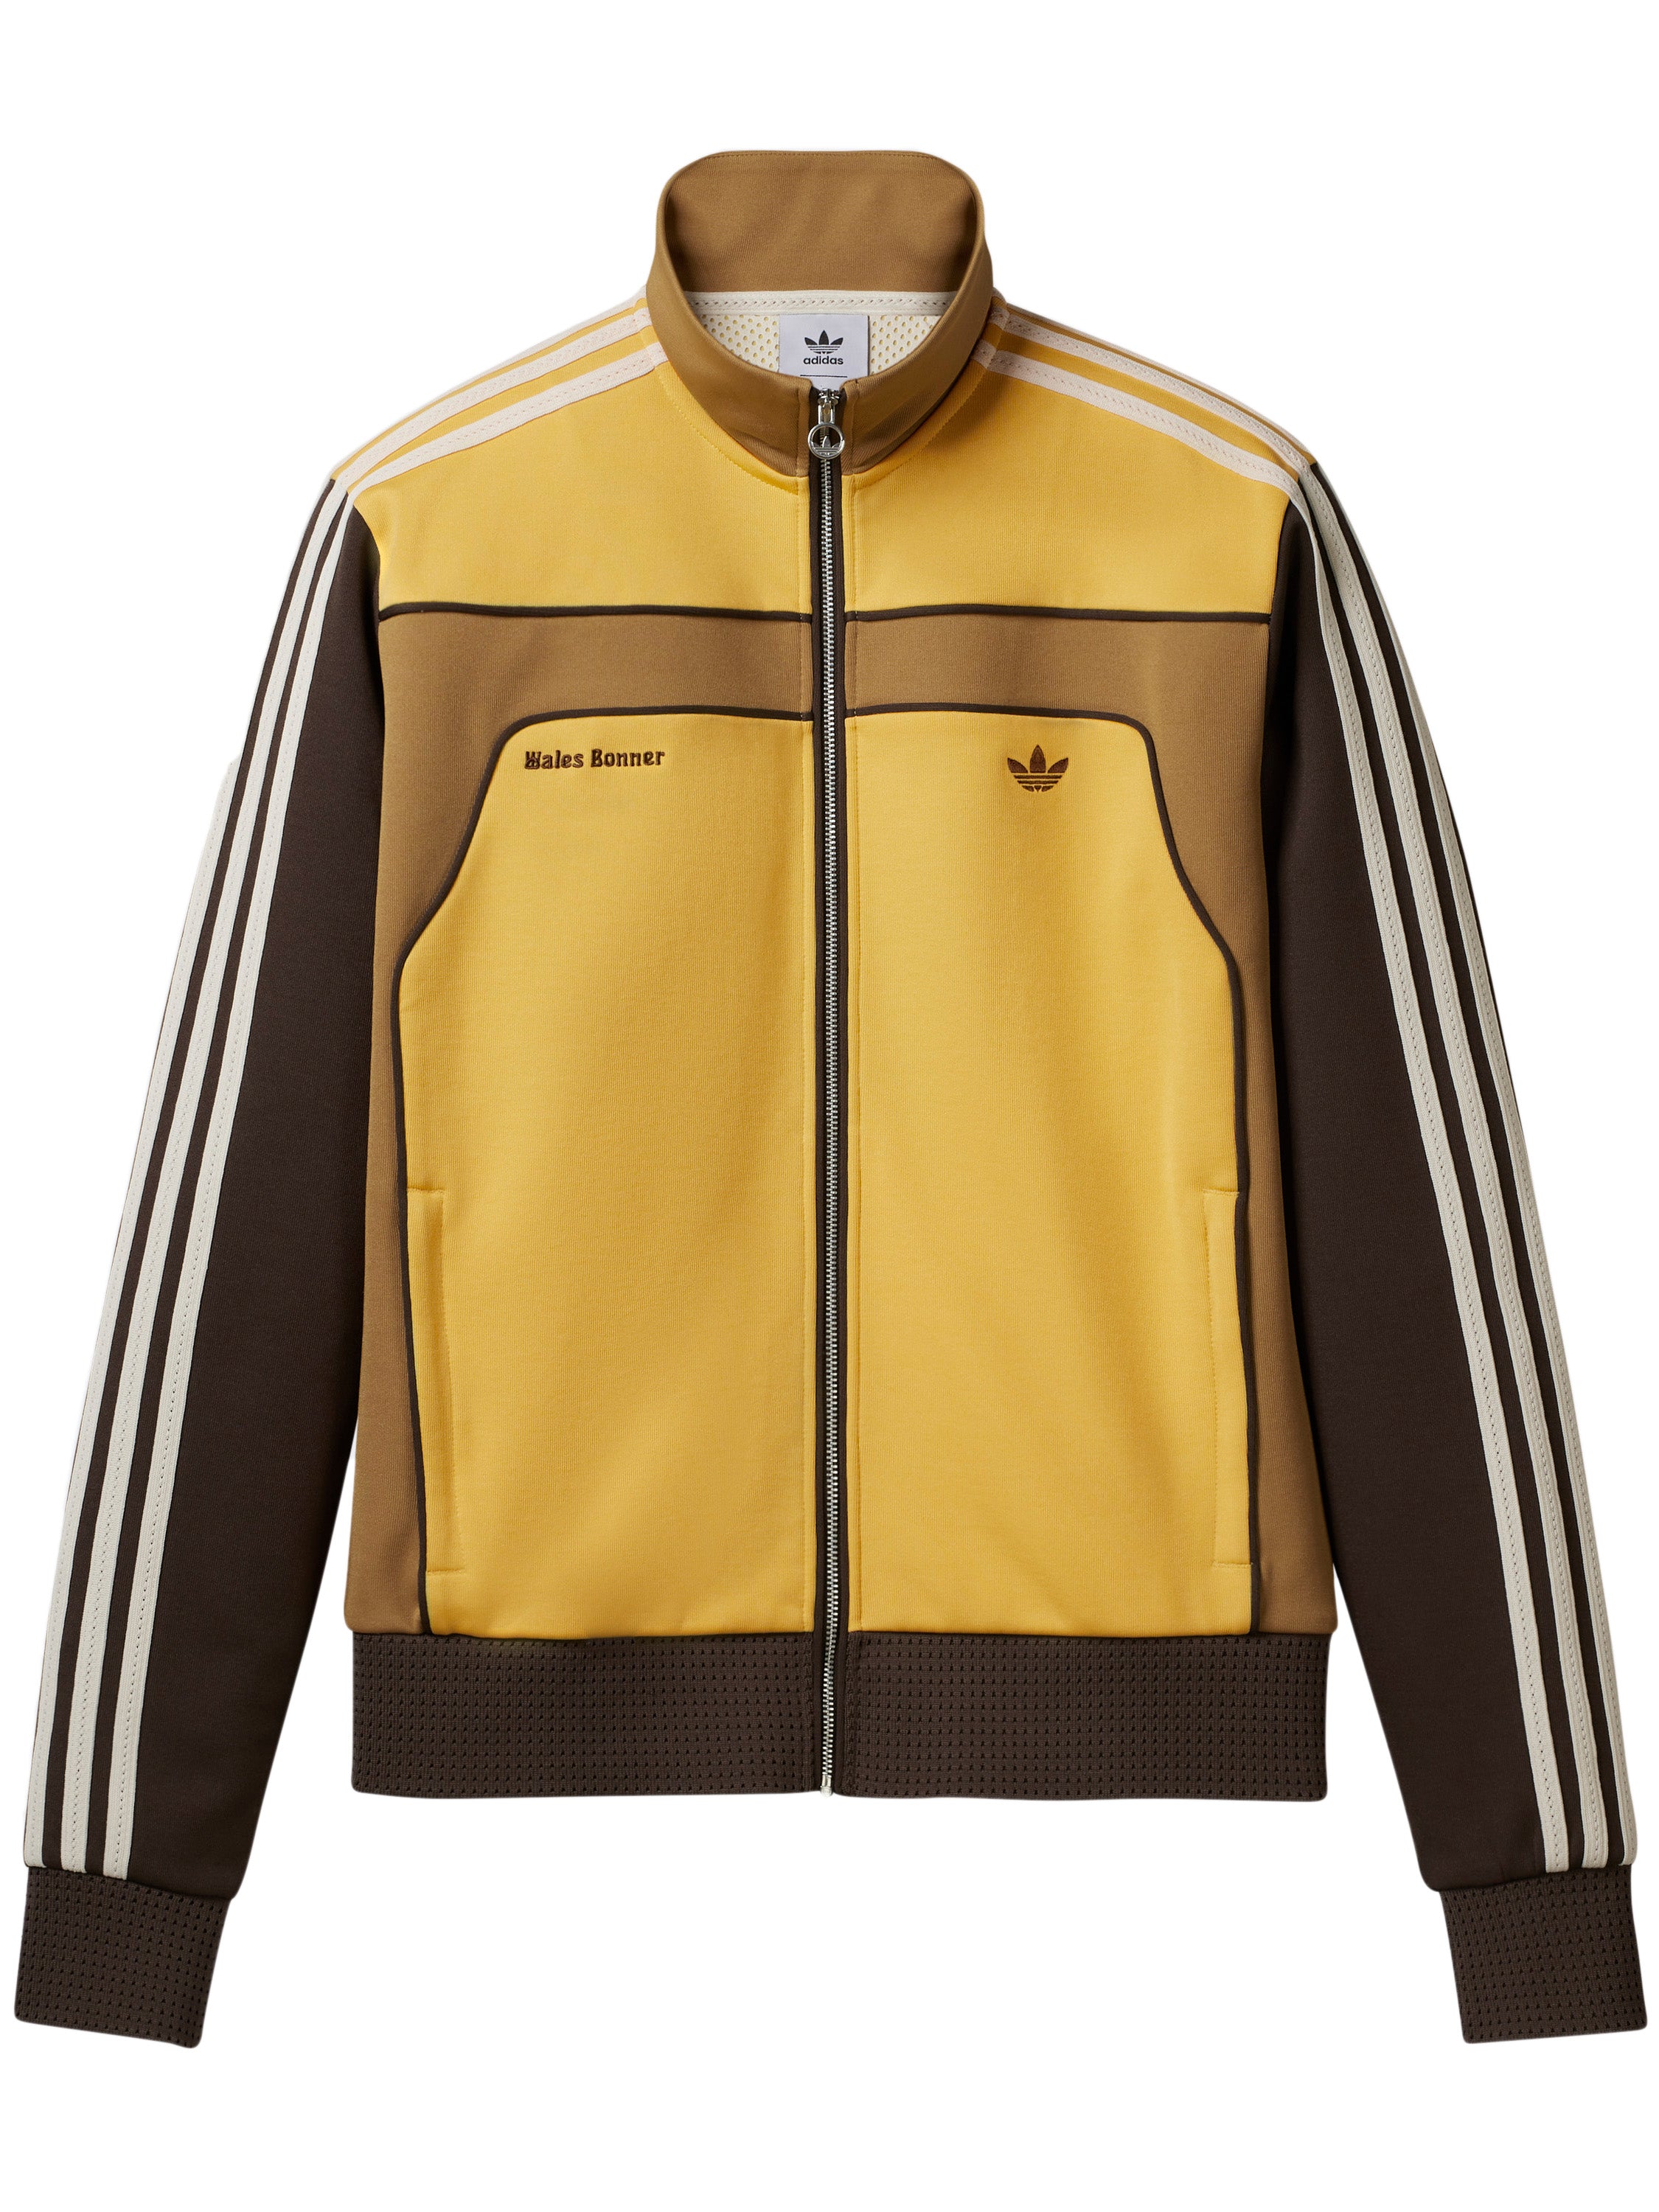 80s Track Top - Yellow/Brown